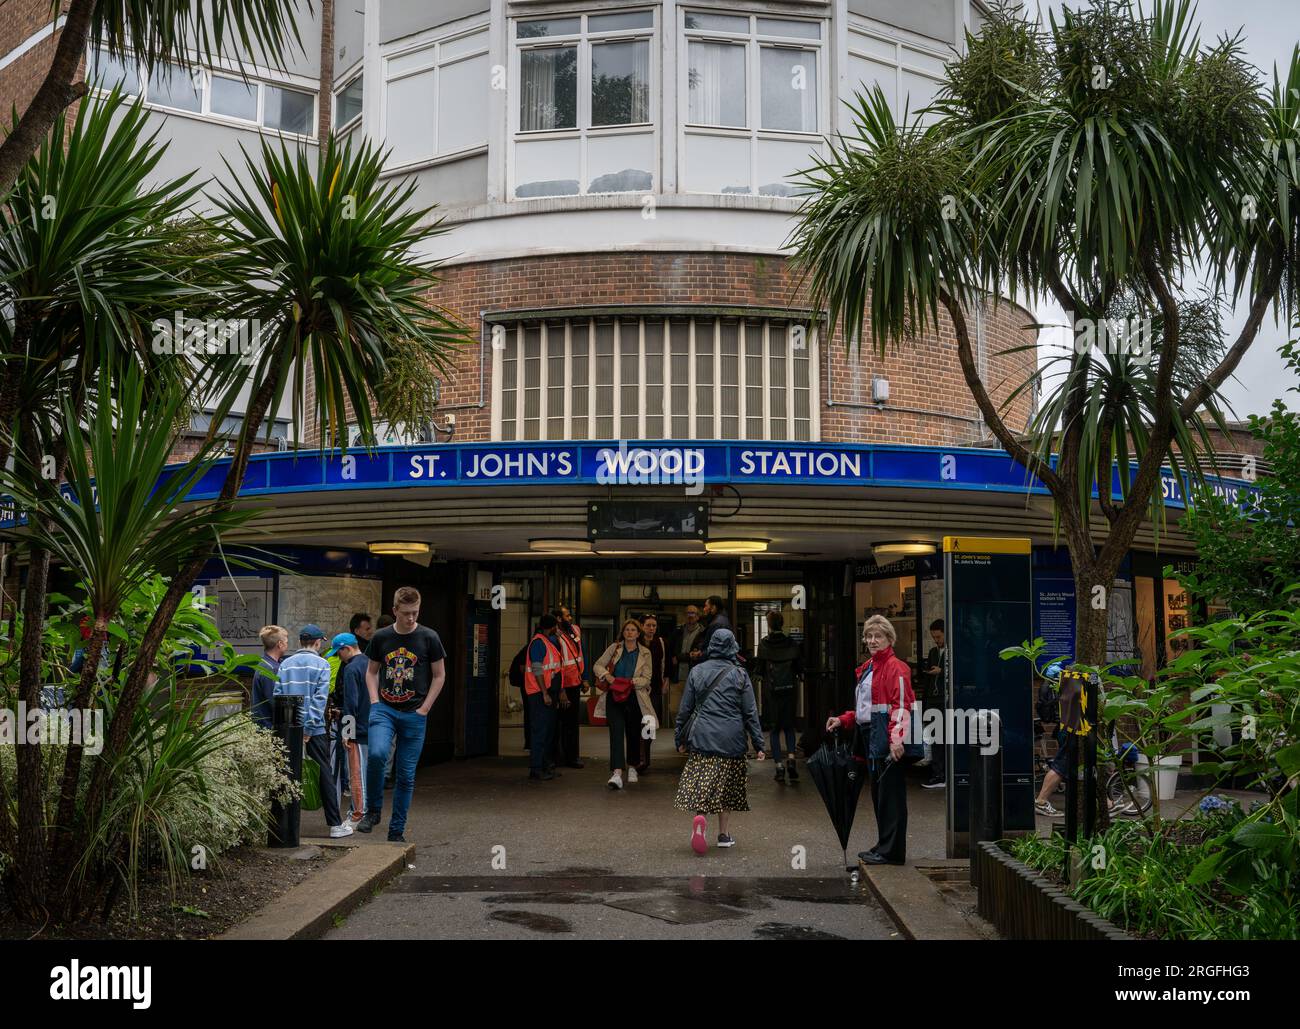 St John's Wood, London, UK: St John's Wood tube station in London. London underground station on the Jubilee Line with people and trees. Stock Photo